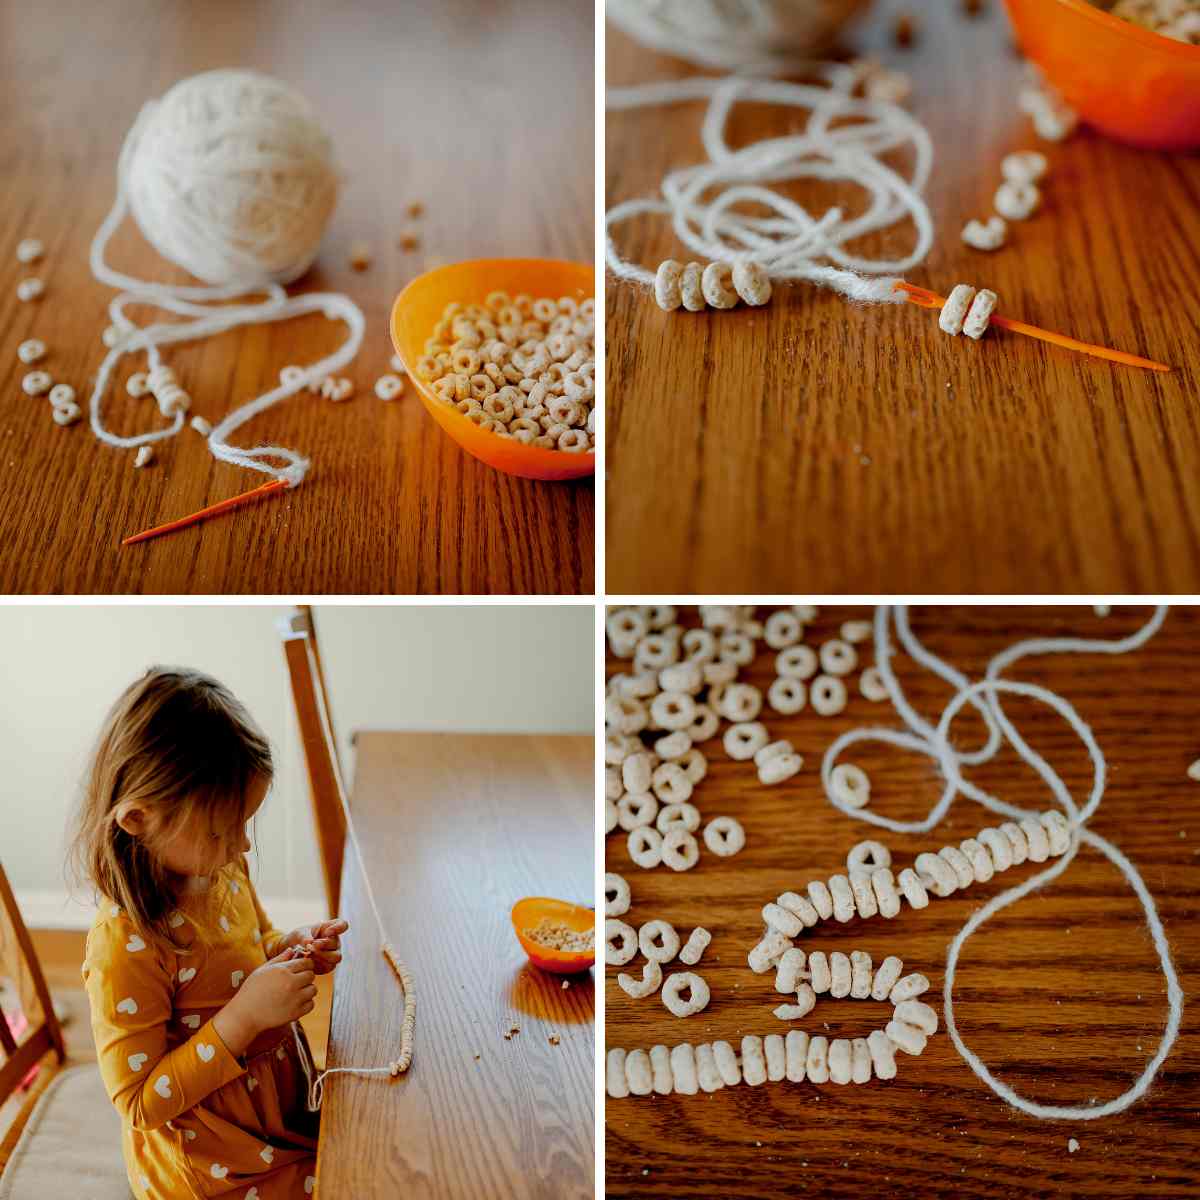 Four images in a grid, of child threading hooped cereal onto a piece of wool using a plastic sewing needle, with one image showing a girl in an orange dress working on the project and the others just showing the needle, wool and cereal. This is part of a blog about different ways to make bird feeders with kids